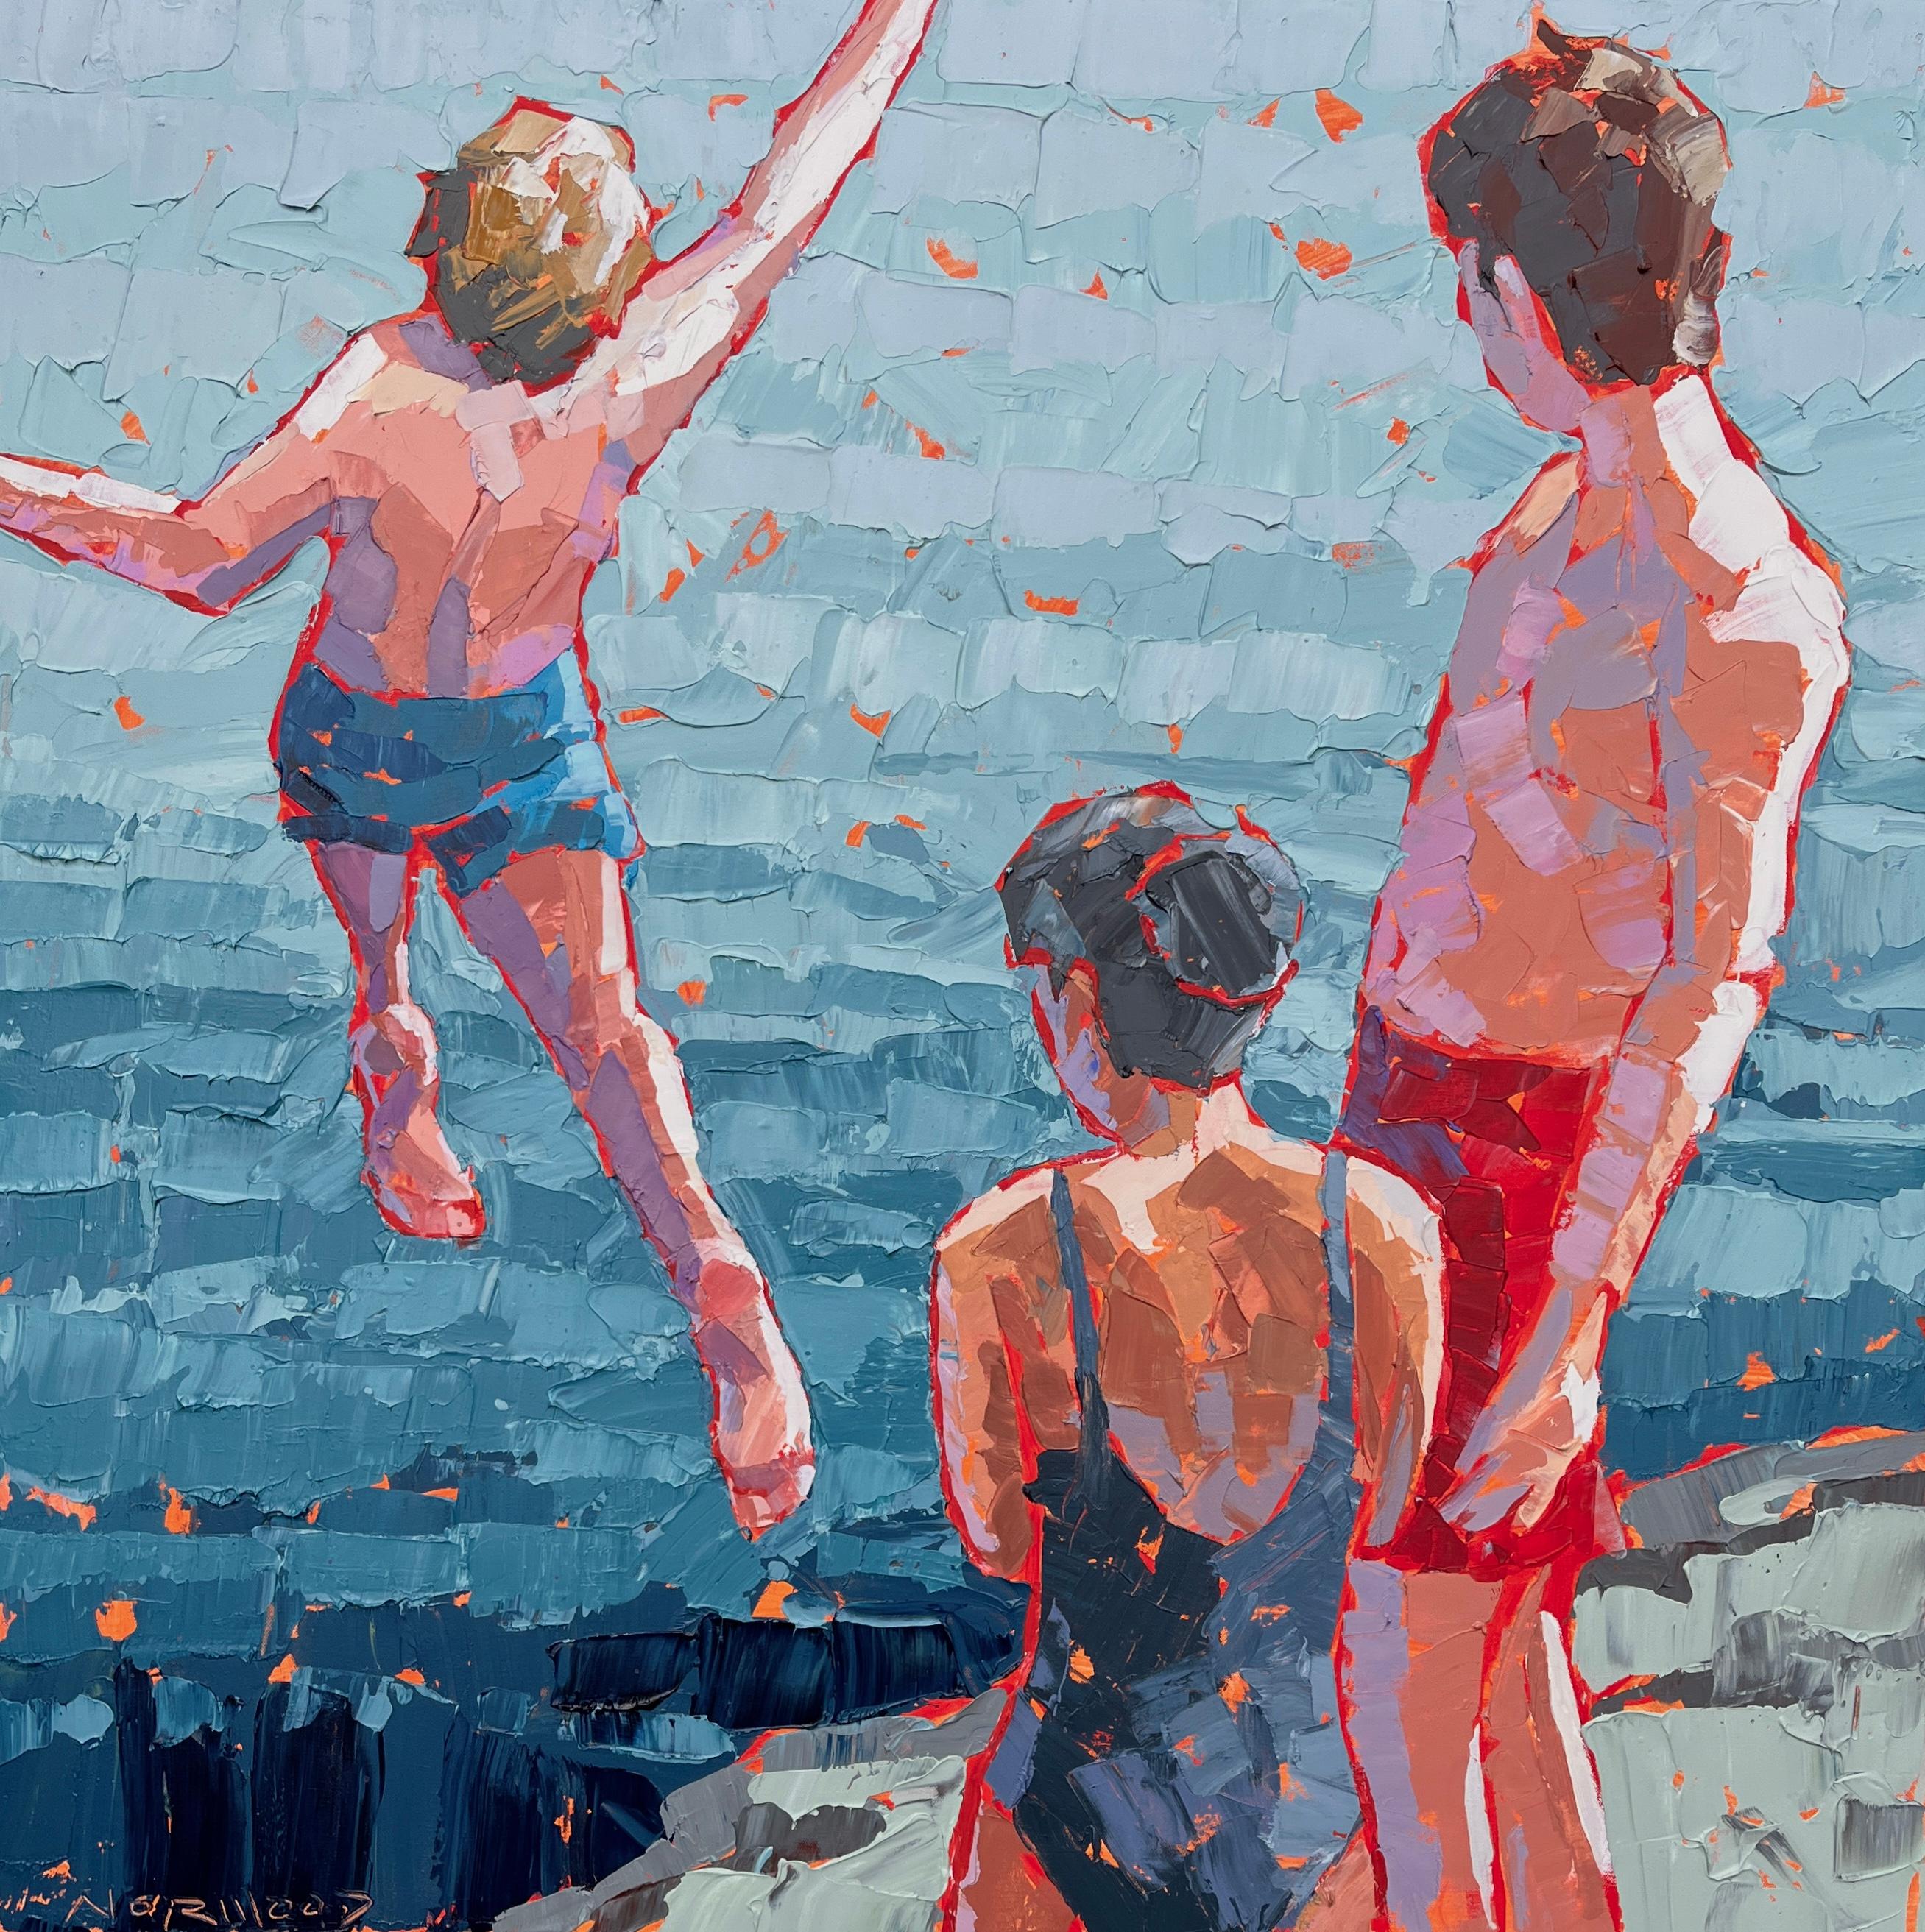 Paul Norwood Figurative Painting - "Great Rock" acrylic palette knife painting of kids jumping into blue water